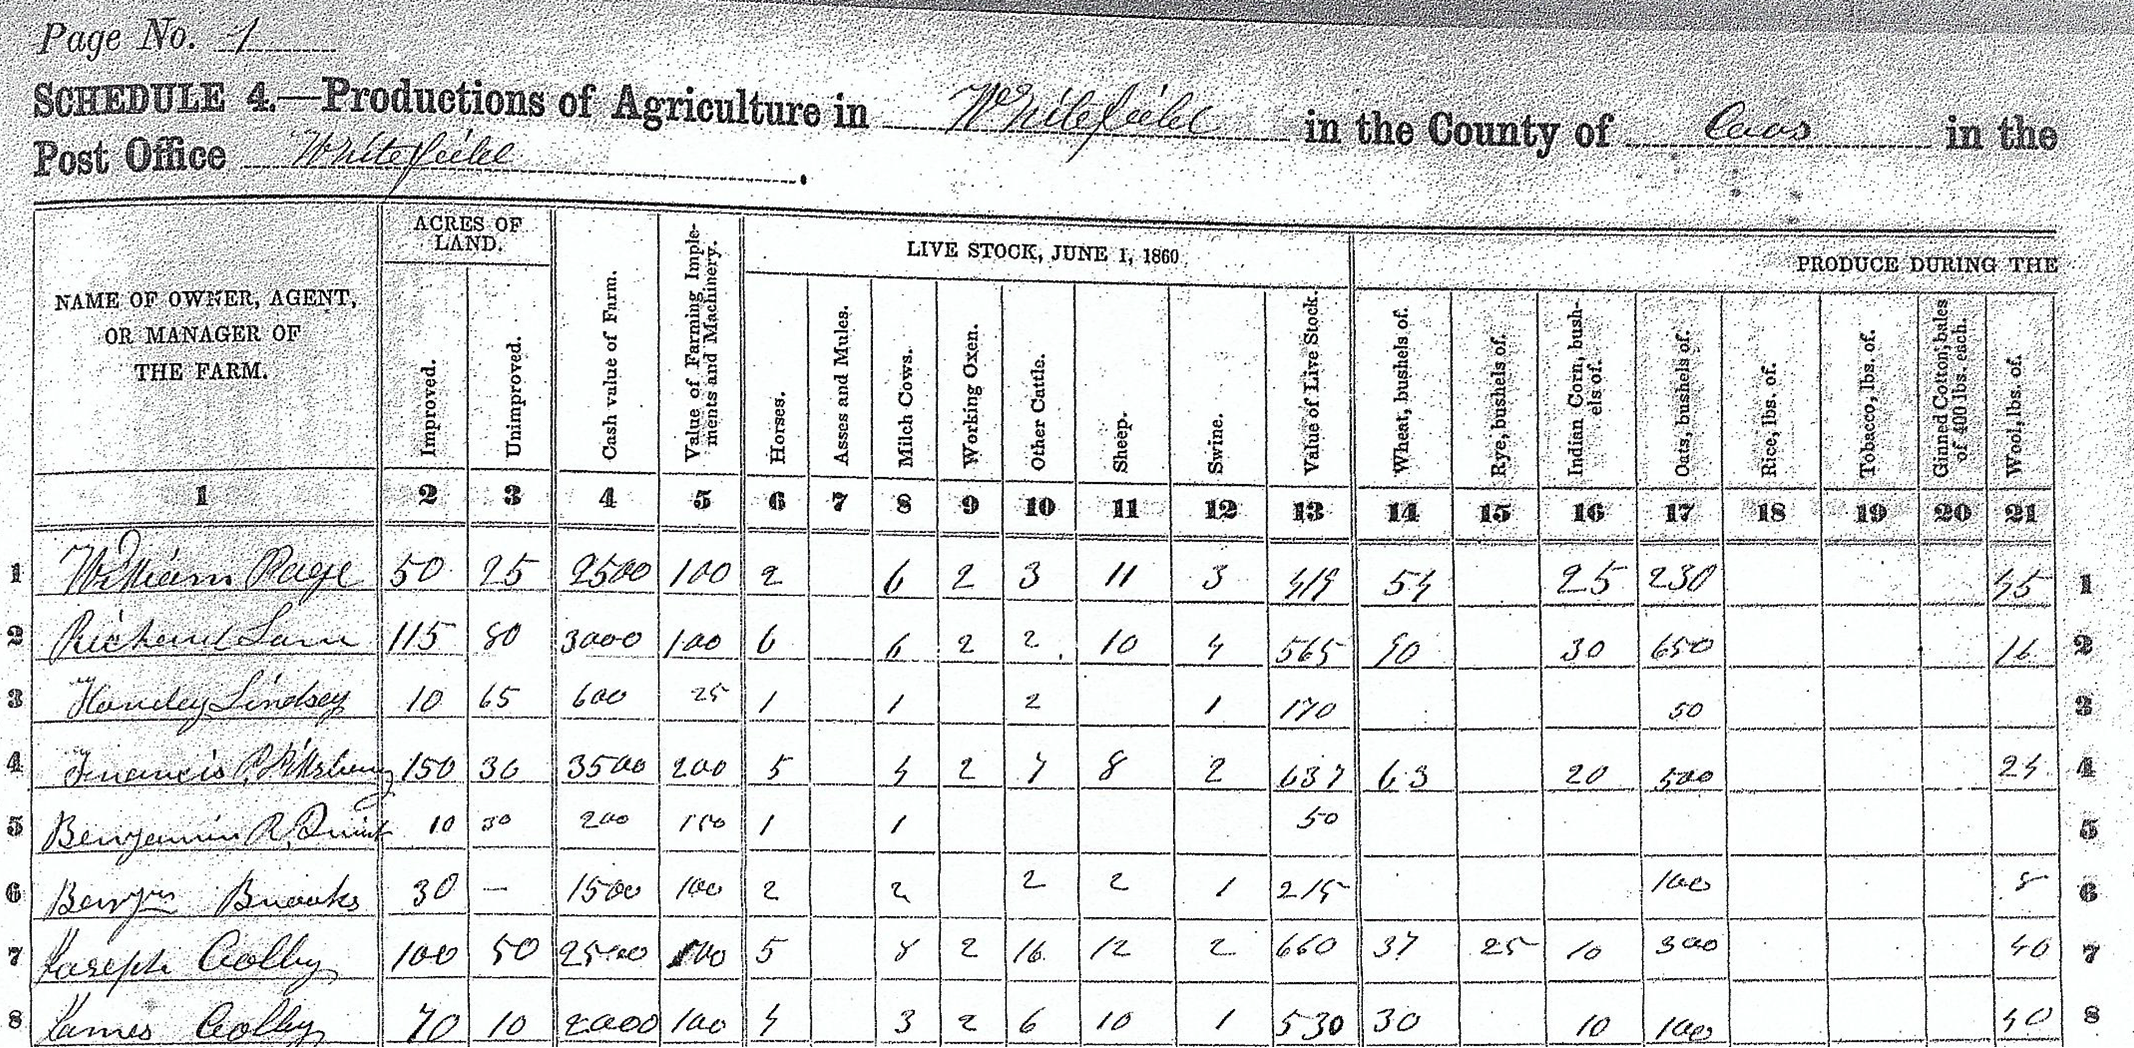  Whitefield Agricultural Census, 1860 